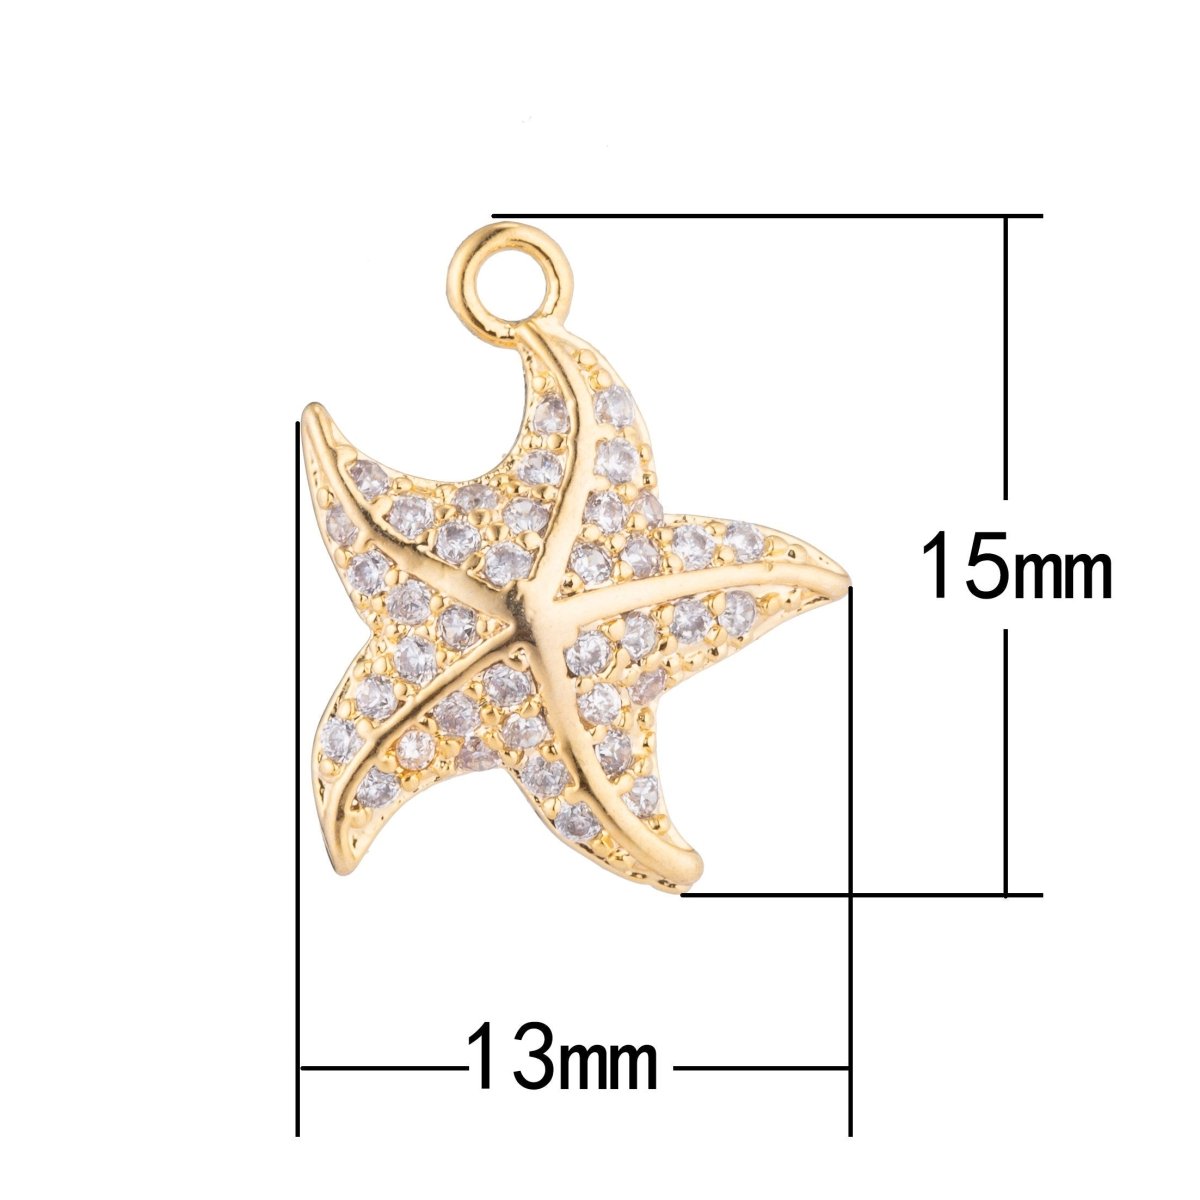 1pc Gold Filled Playful Star Fish, Under the Sea, Disney Alive, Cubic Zirconia Bracelet Charm, Necklace Pendant, Findings for Jewelry Making C-207 - DLUXCA